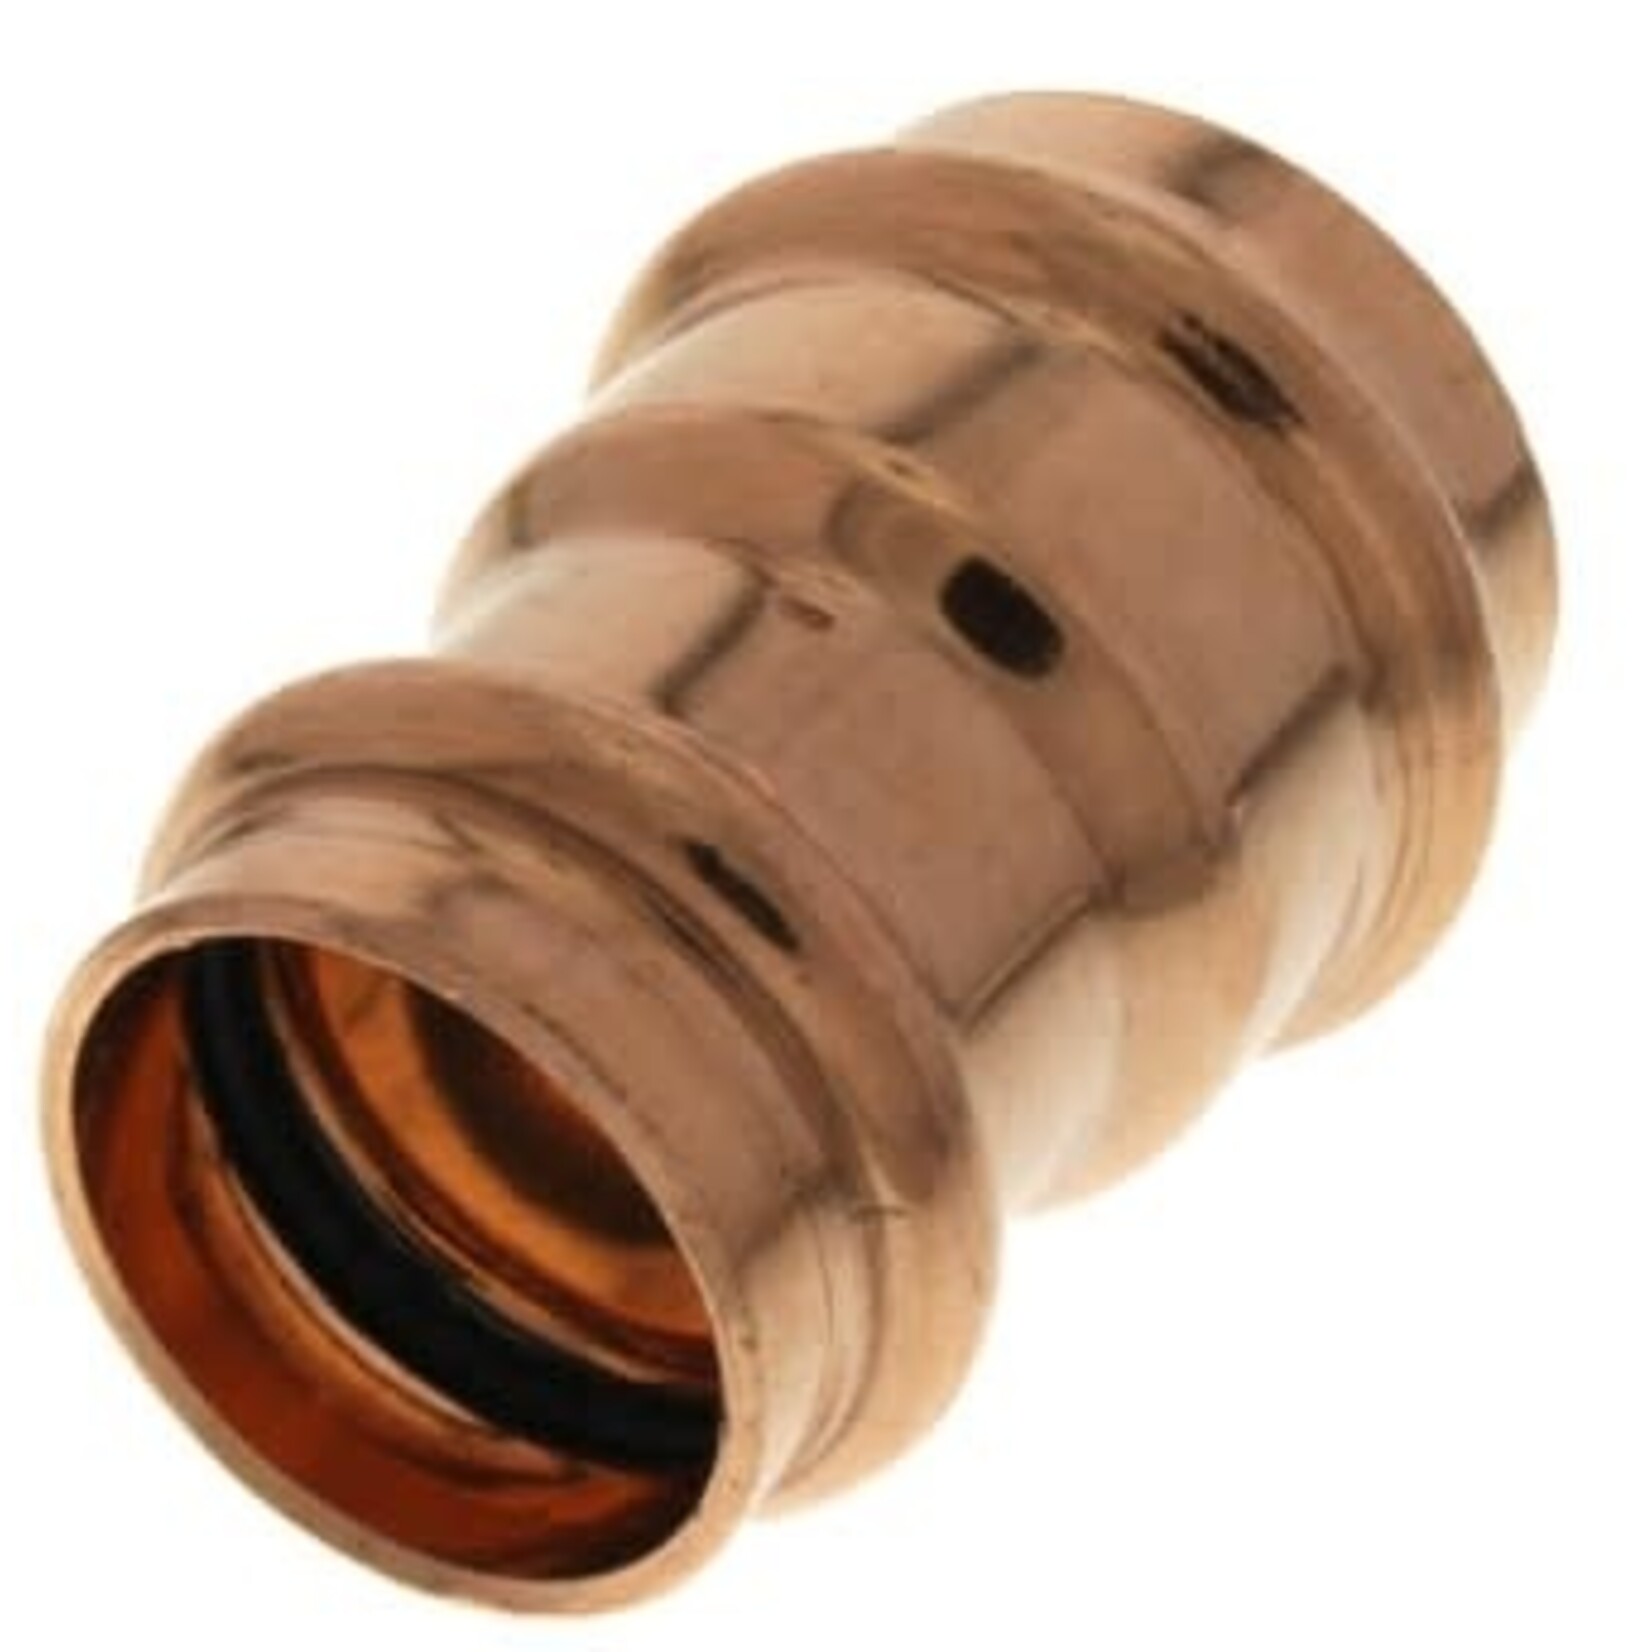 NDL 1 1/4 IN X 1 IN PROPRESS REDUCER COUPLING